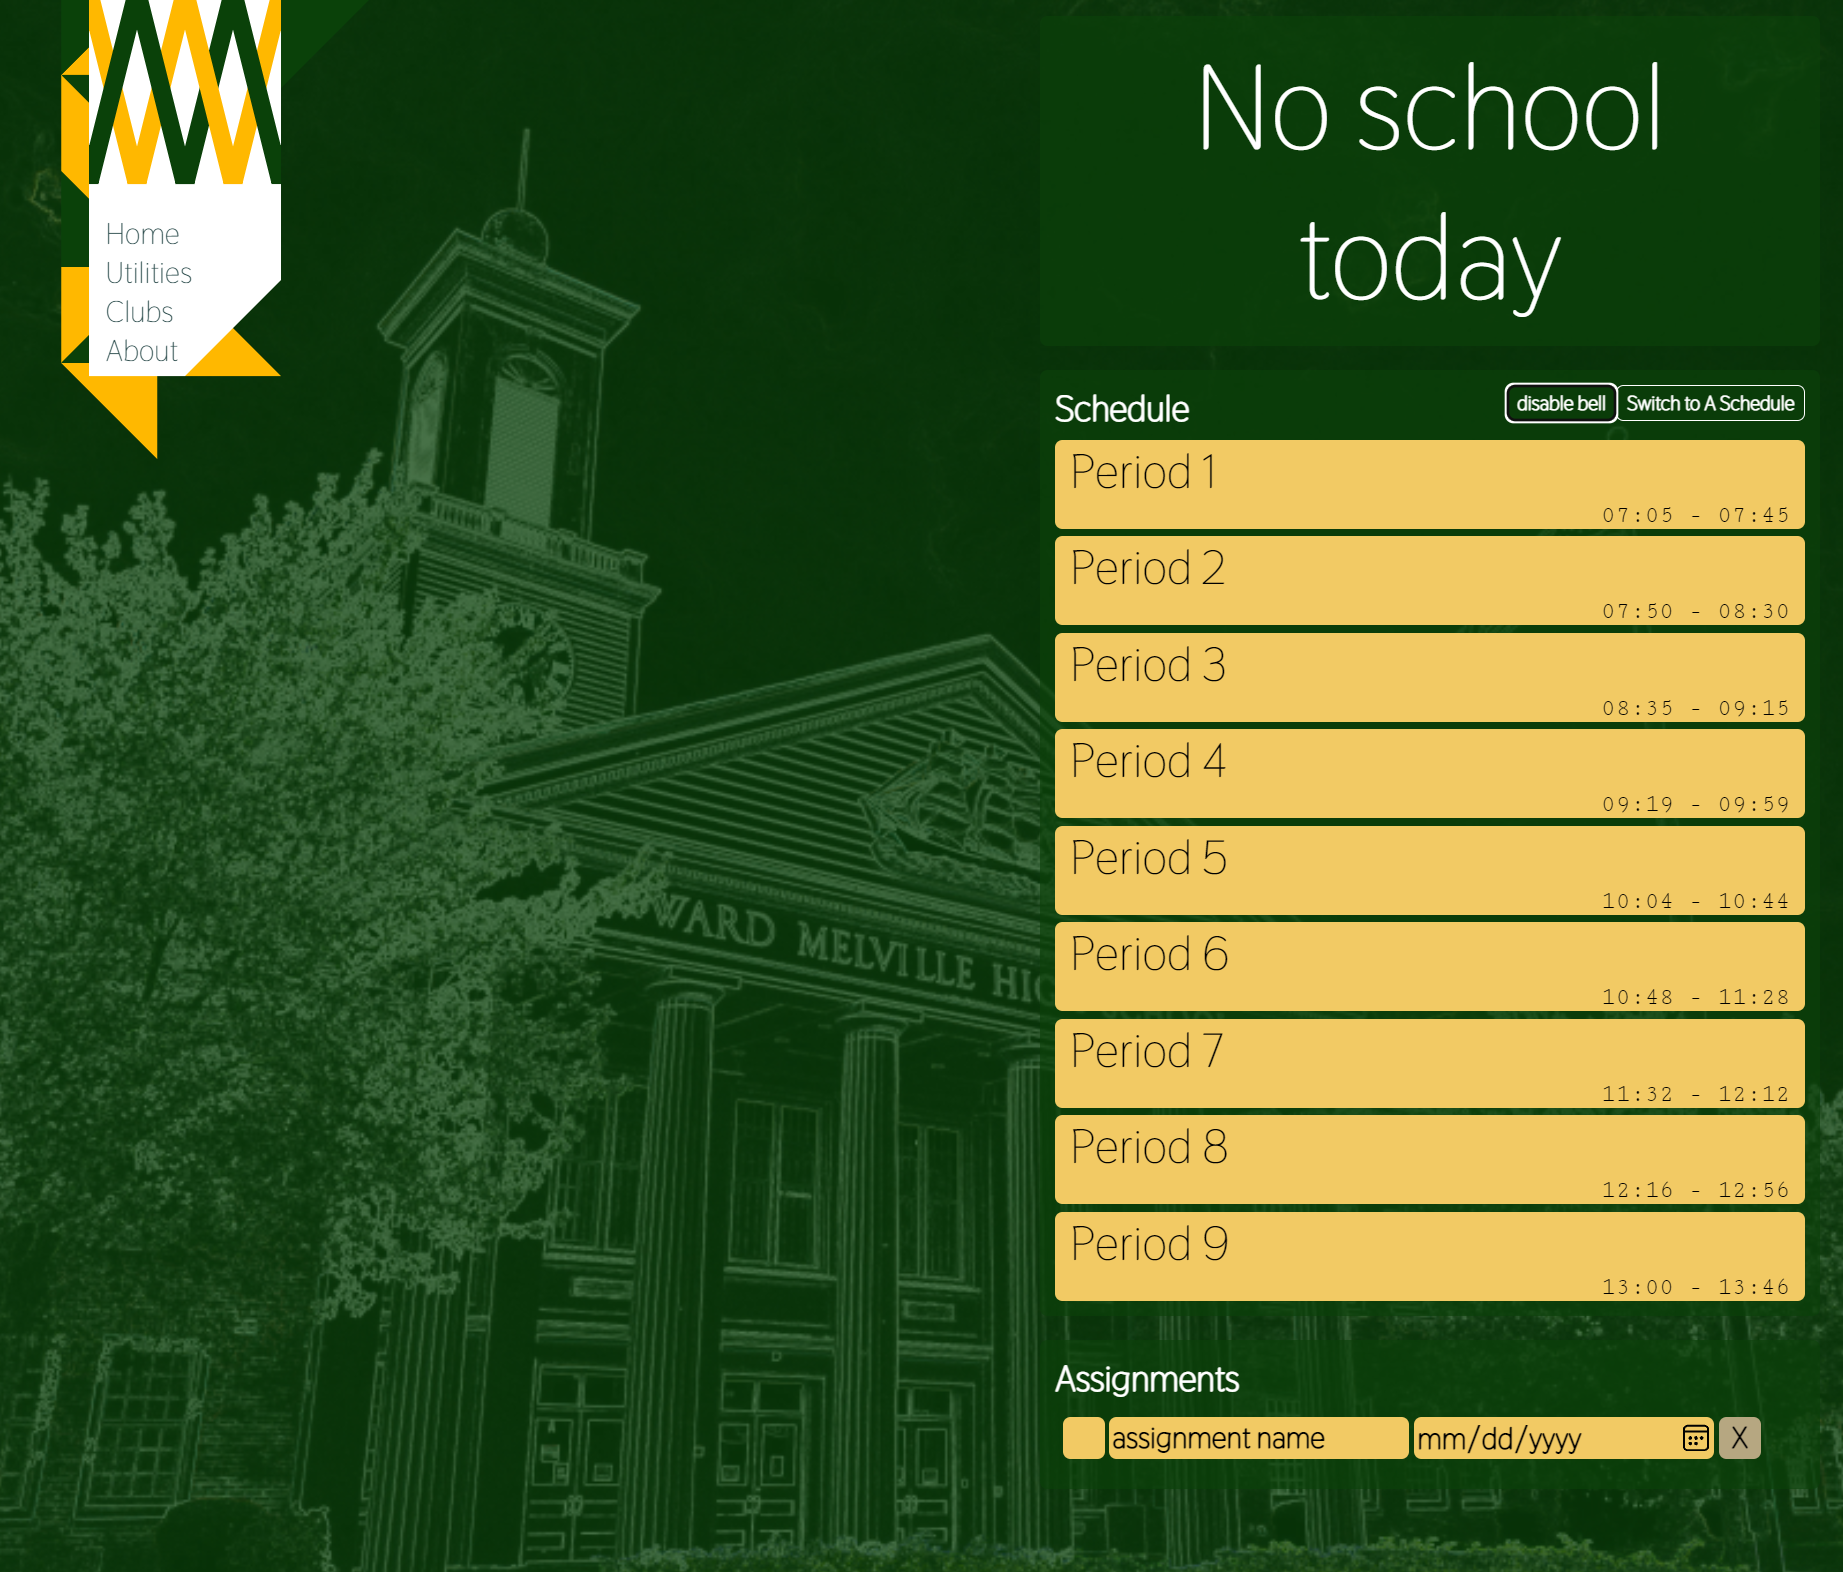 The main page of the app with the schedule and assignments